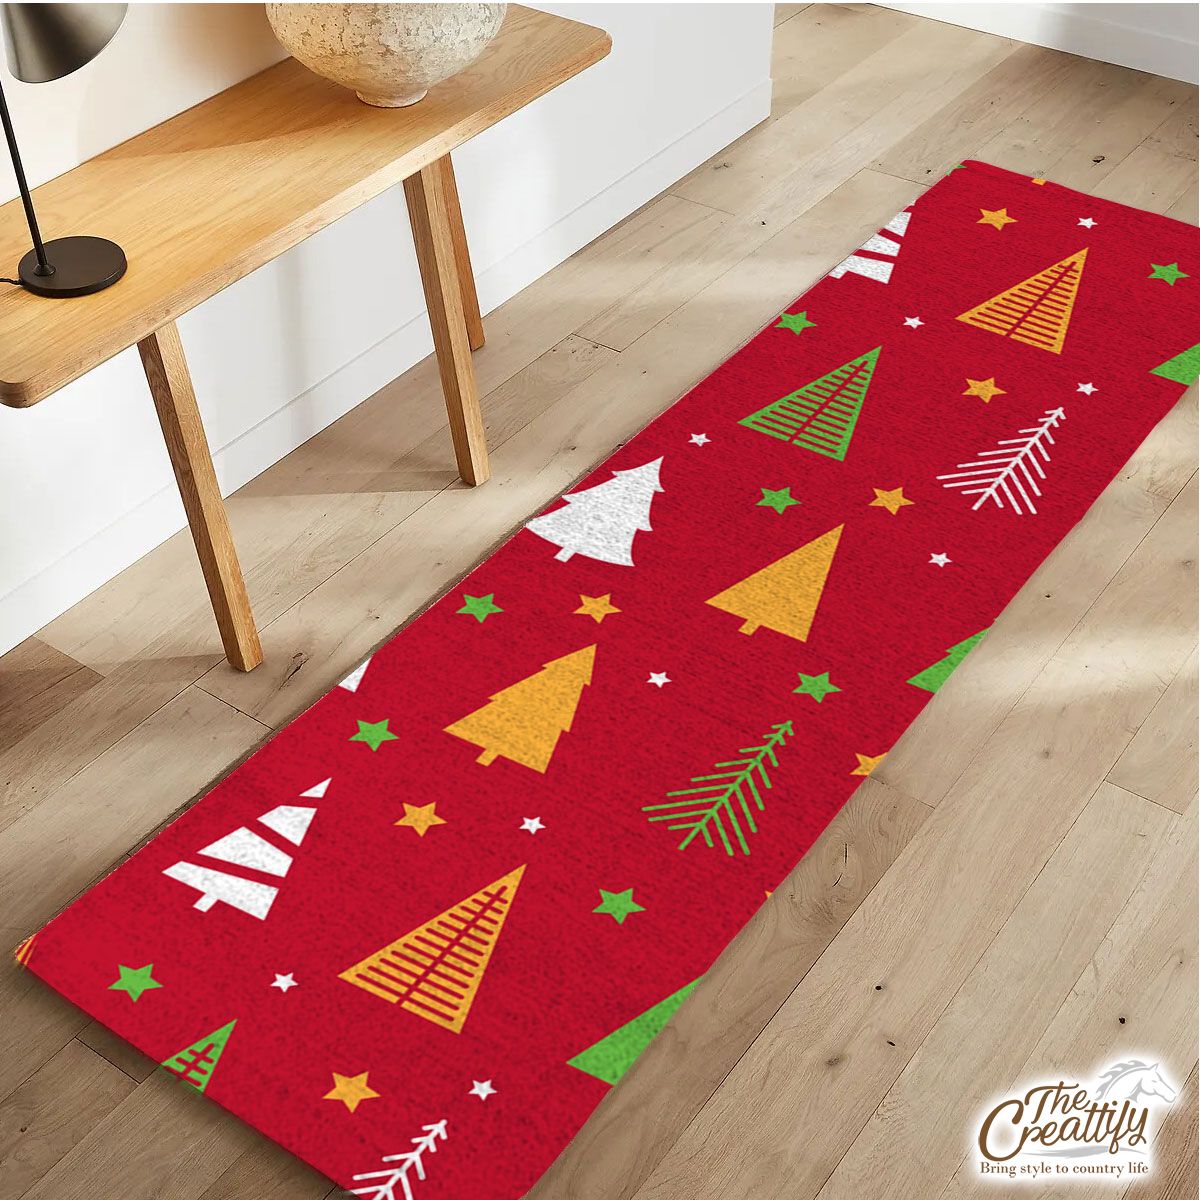 Red Green And White Christmas Tree With Star Runner Carpet